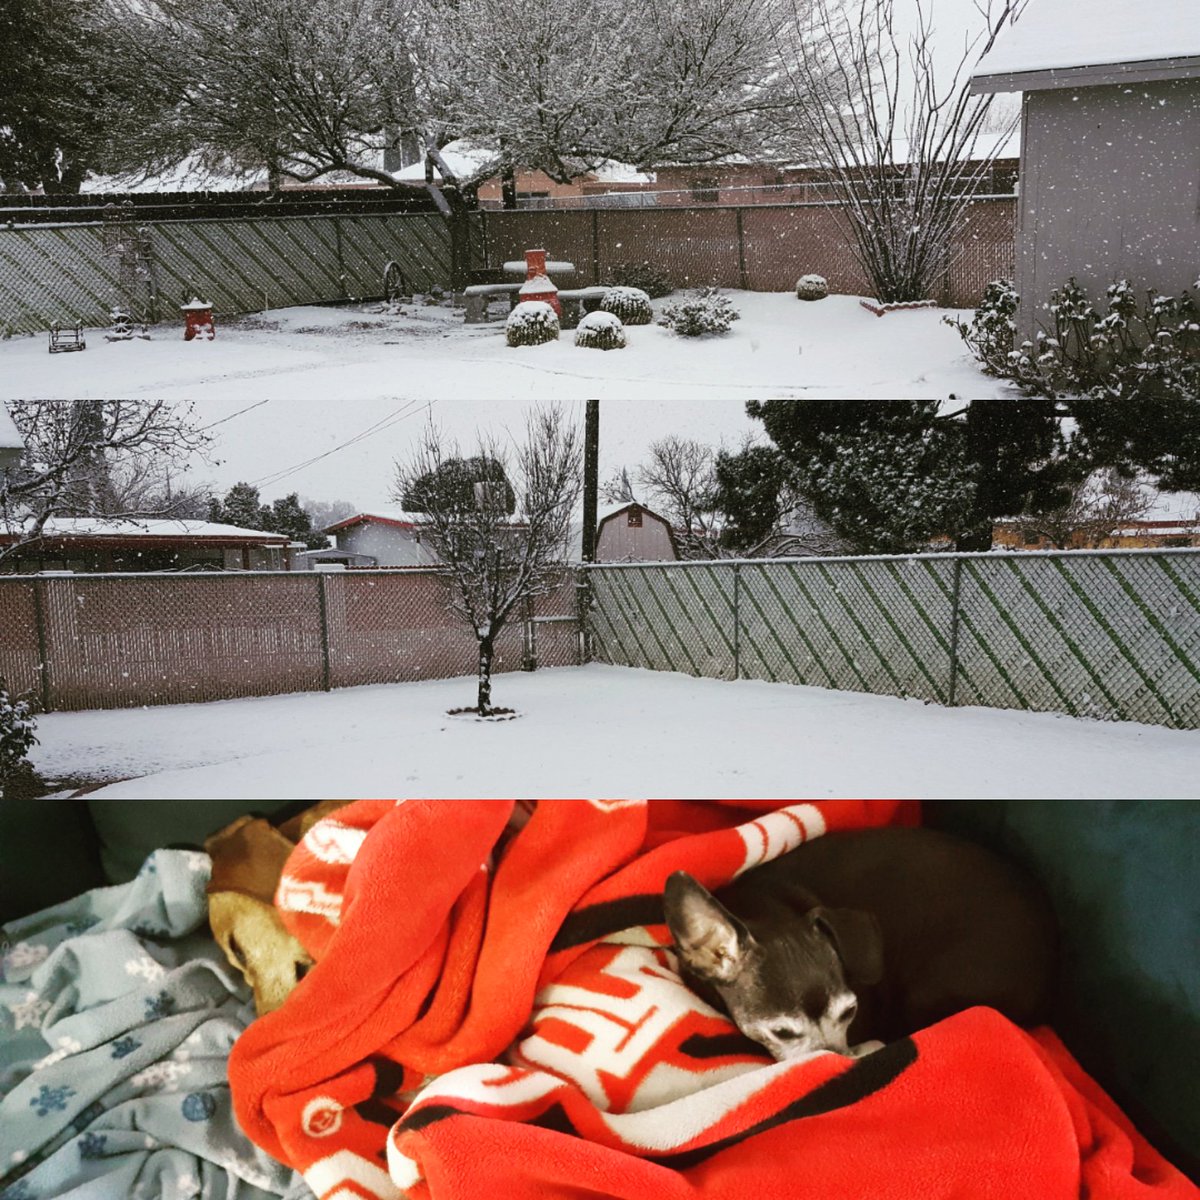 Still snowing! Crazy. Don't remember the last time my backyard was white! Dogs are still tucked in blankets. Pretty sure this is where they stay all day! #snowinarizona #snowday #arizona #arizonaauthor #saturdaymorning #dogsofinstagram #dauchshund #bjkurtz